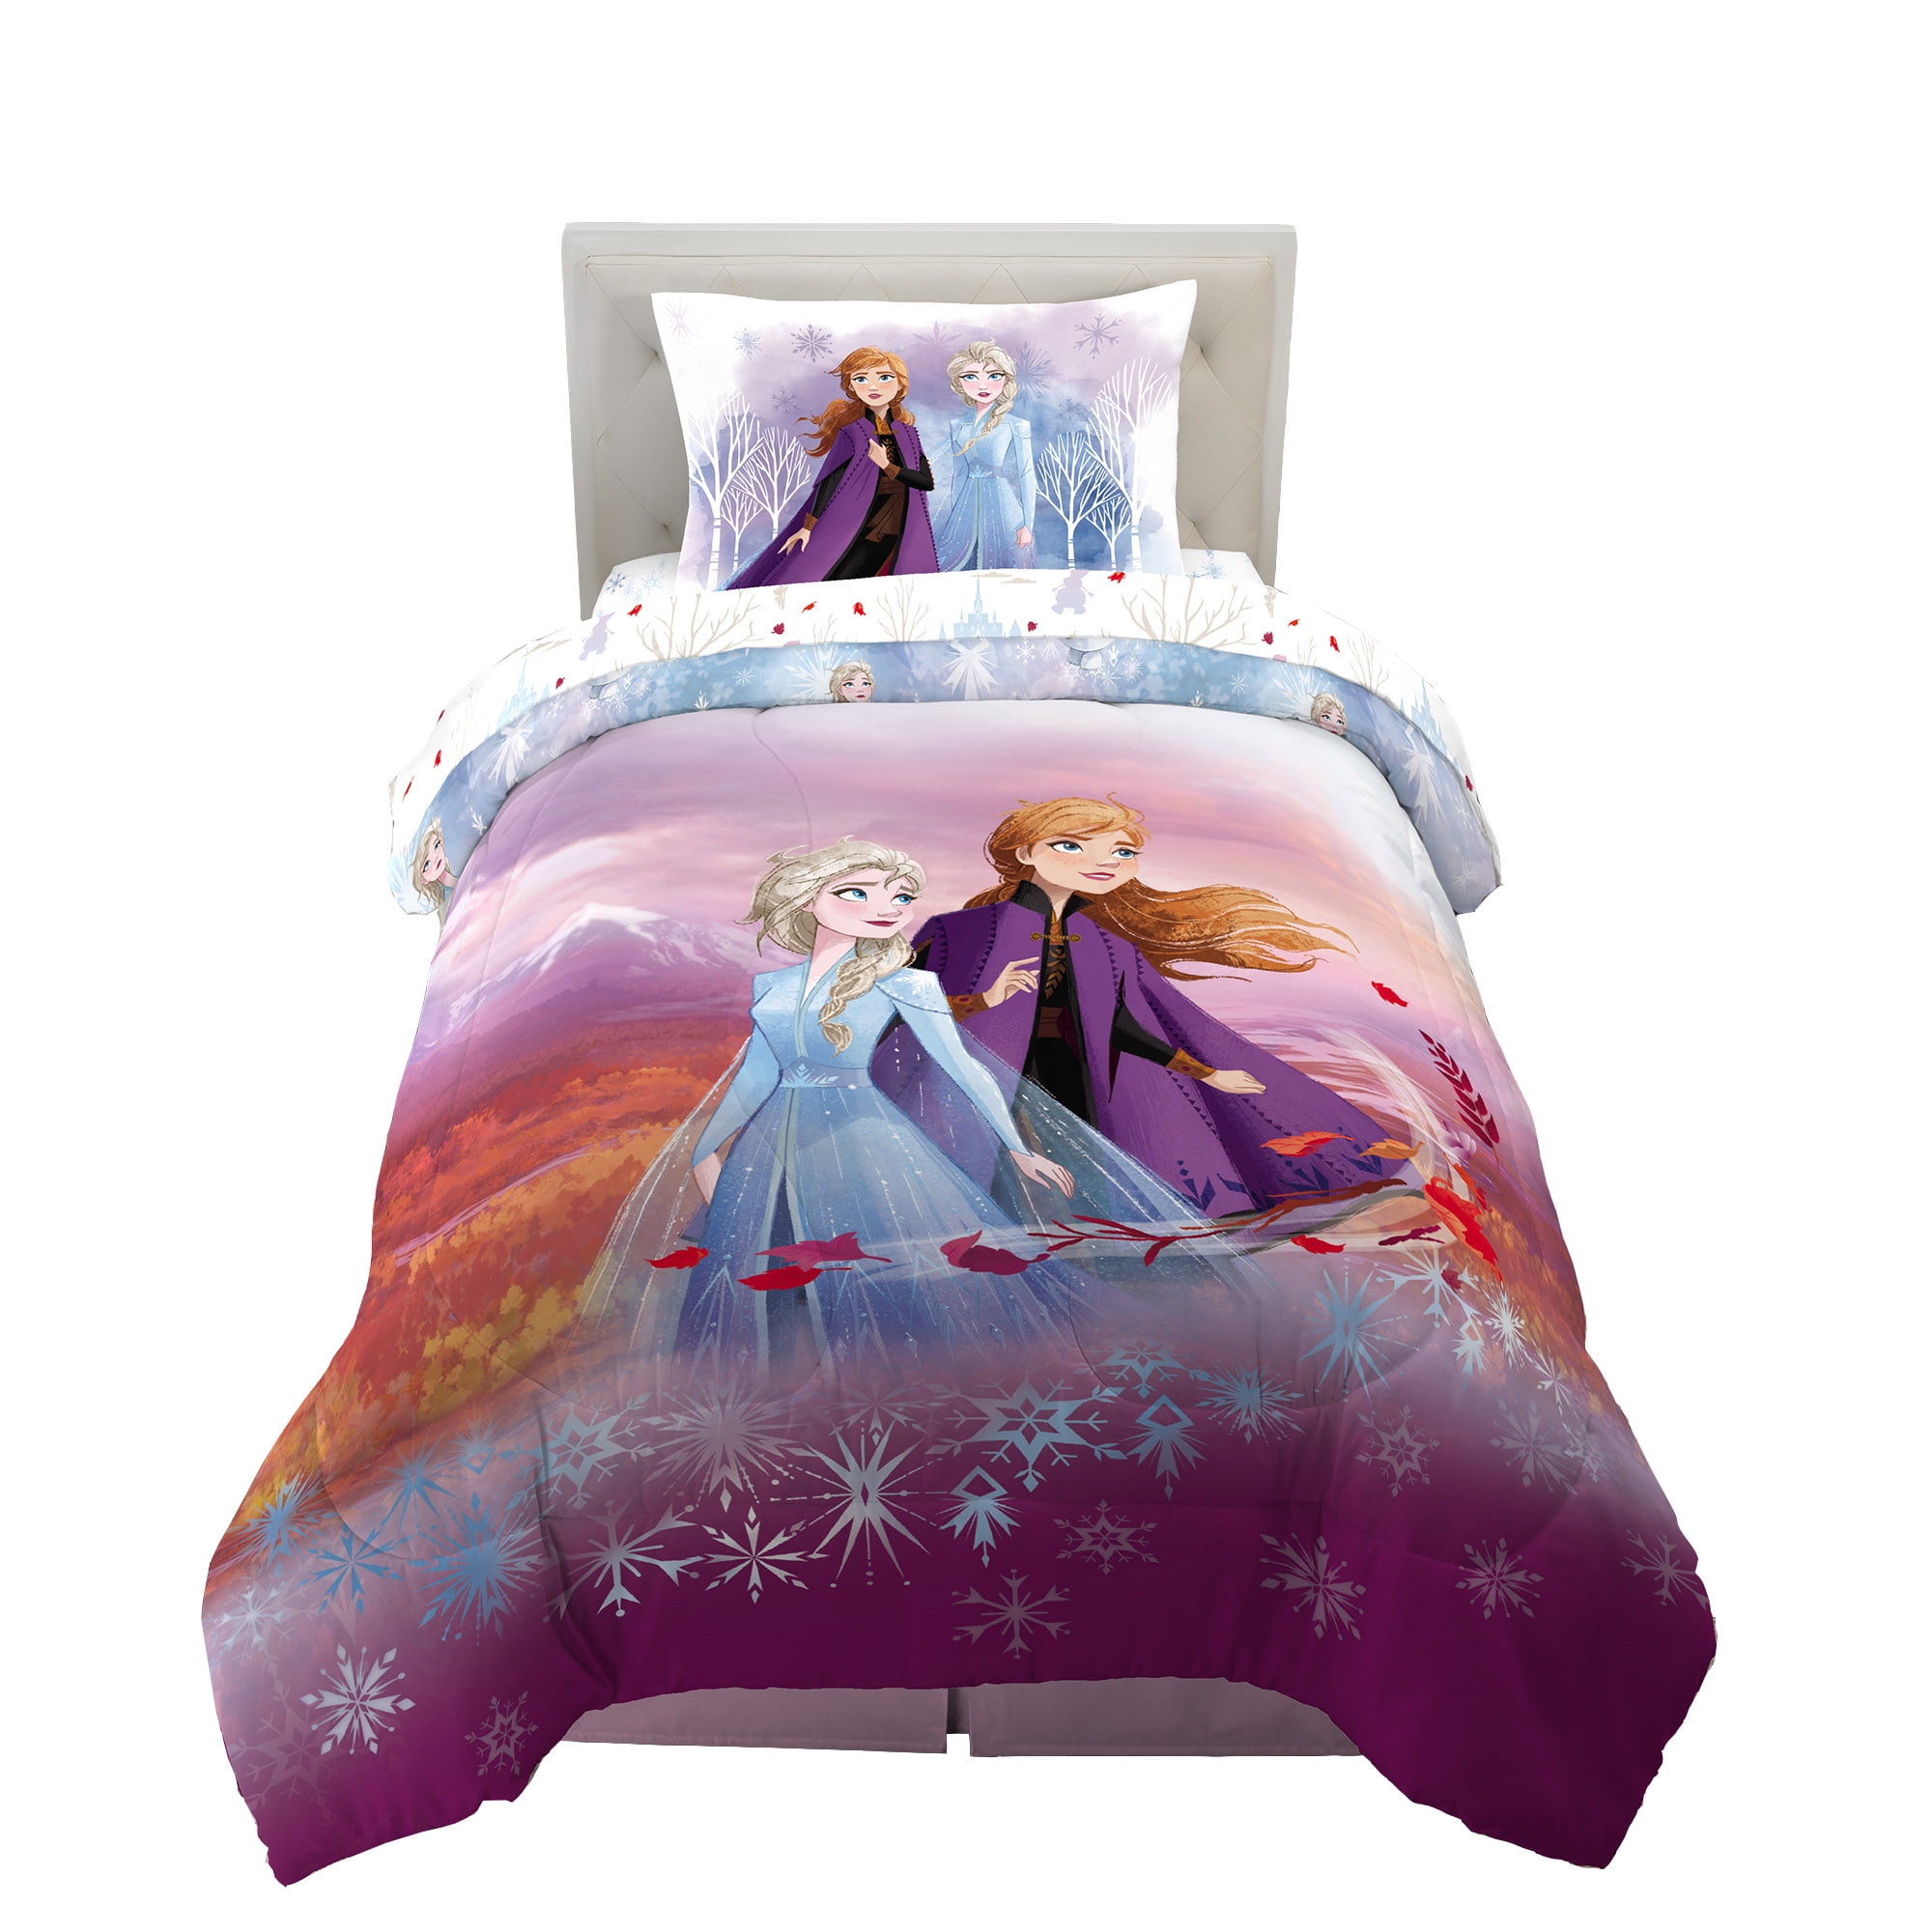 Plum and W Lavender Magical Journey 4 Piece Toddler Bed Set Details about   Disney Frozen 2